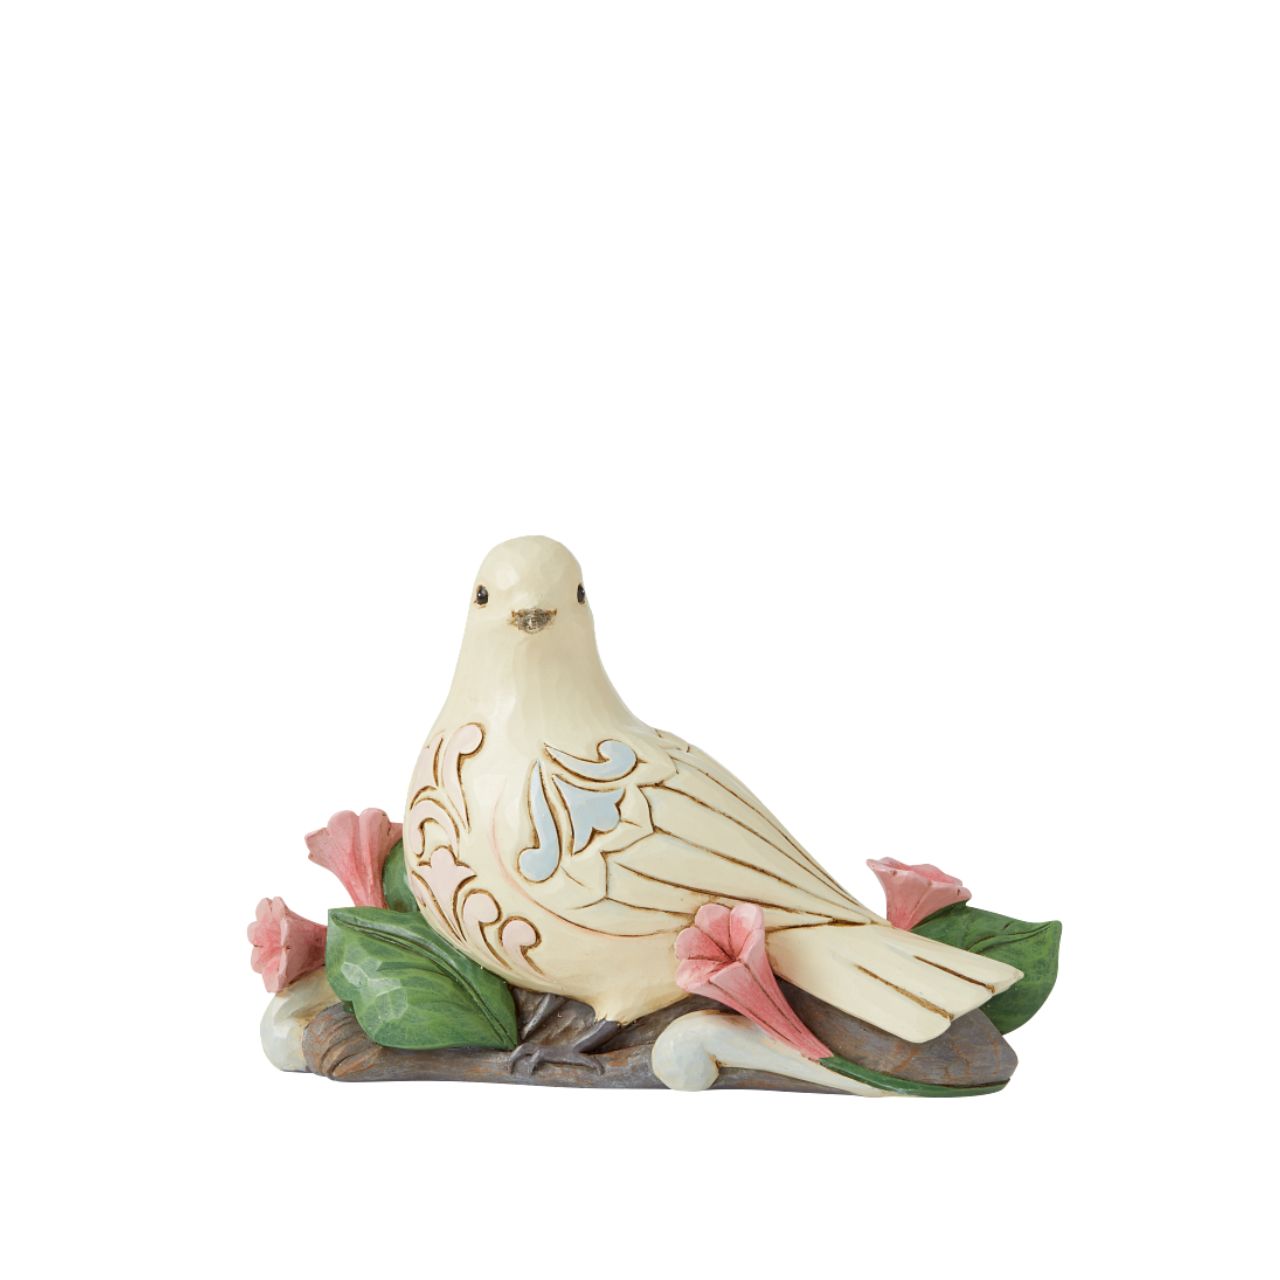 Jim Shore White Dove Figurine  "Peaceful Messenger" Birds are always a delight to watch. With alluring plumage and peaceful posture, they're often thought of as good omens and symbols of freedom. A Baltimore Oriole is the star of this Jim Shore piece, mesmerizing the eye with it's commanding presence.